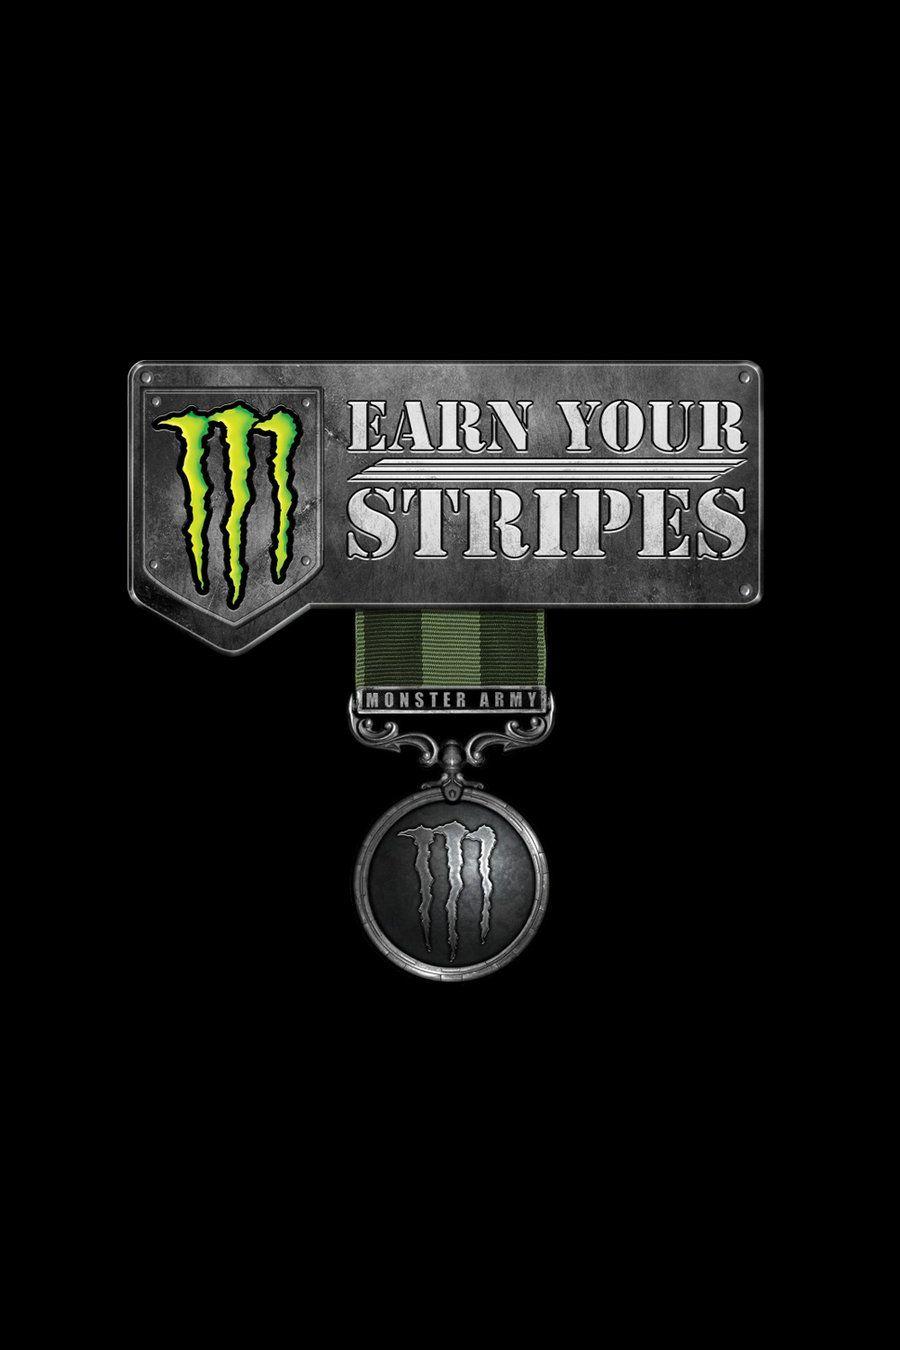 Monster Energy Iphone Wallpapers Top Free Monster Energy Iphone Backgrounds Wallpaperaccess